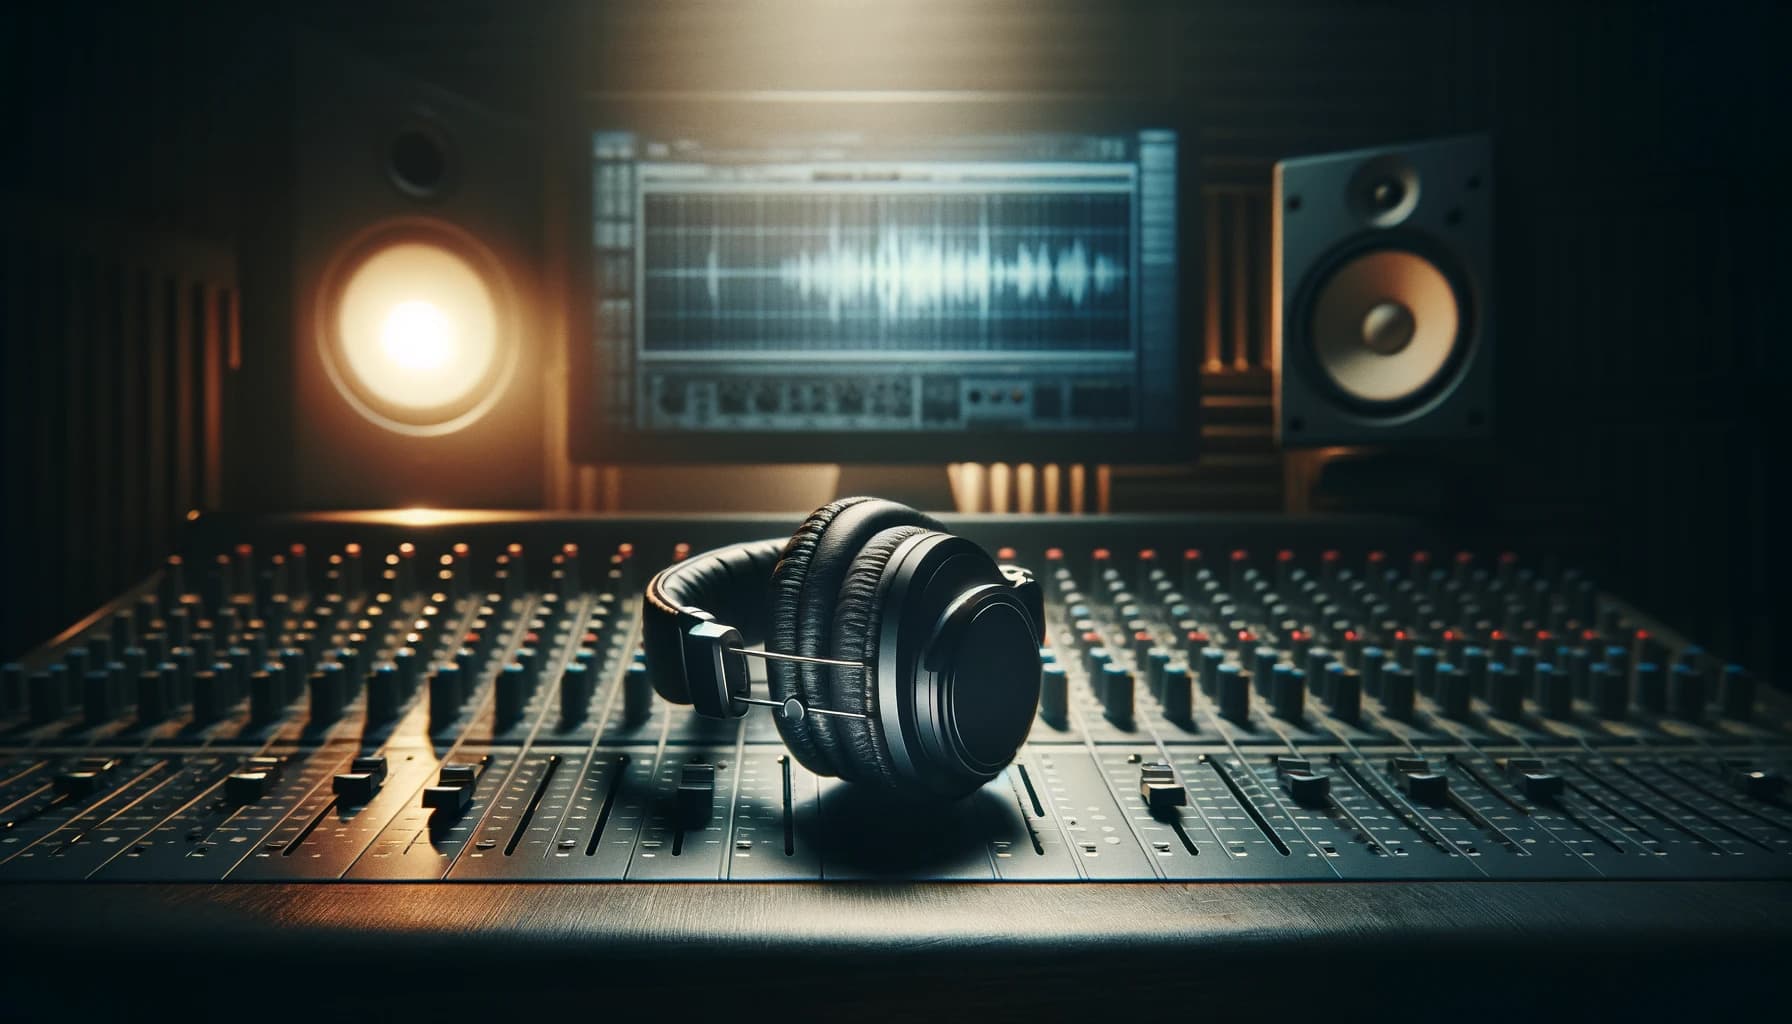 An artistic image focusing on a pair of high-quality studio headphones resting on a mixing console in a dimly lit room, symbolizing the solitary